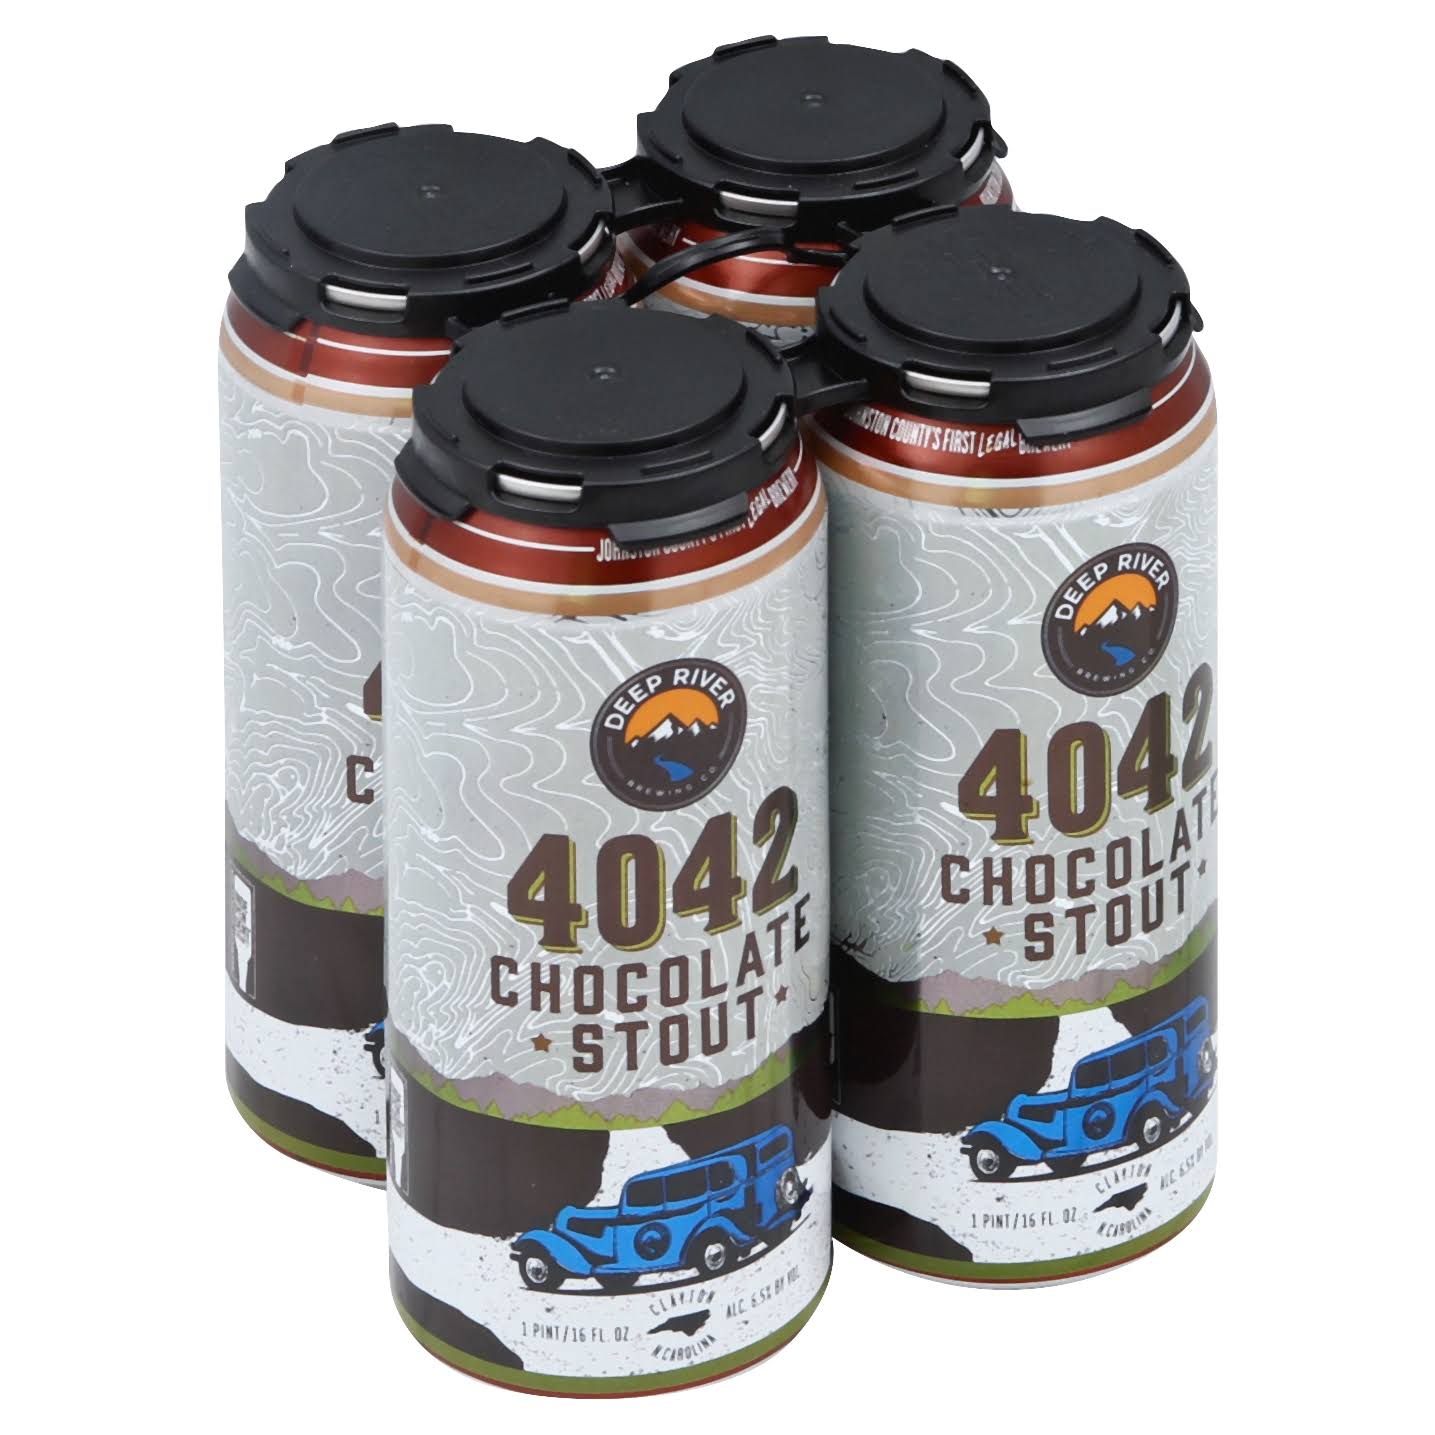 Deep River Beer, Chocolate Stout, 4042 - 4 pack, 1 pint cans